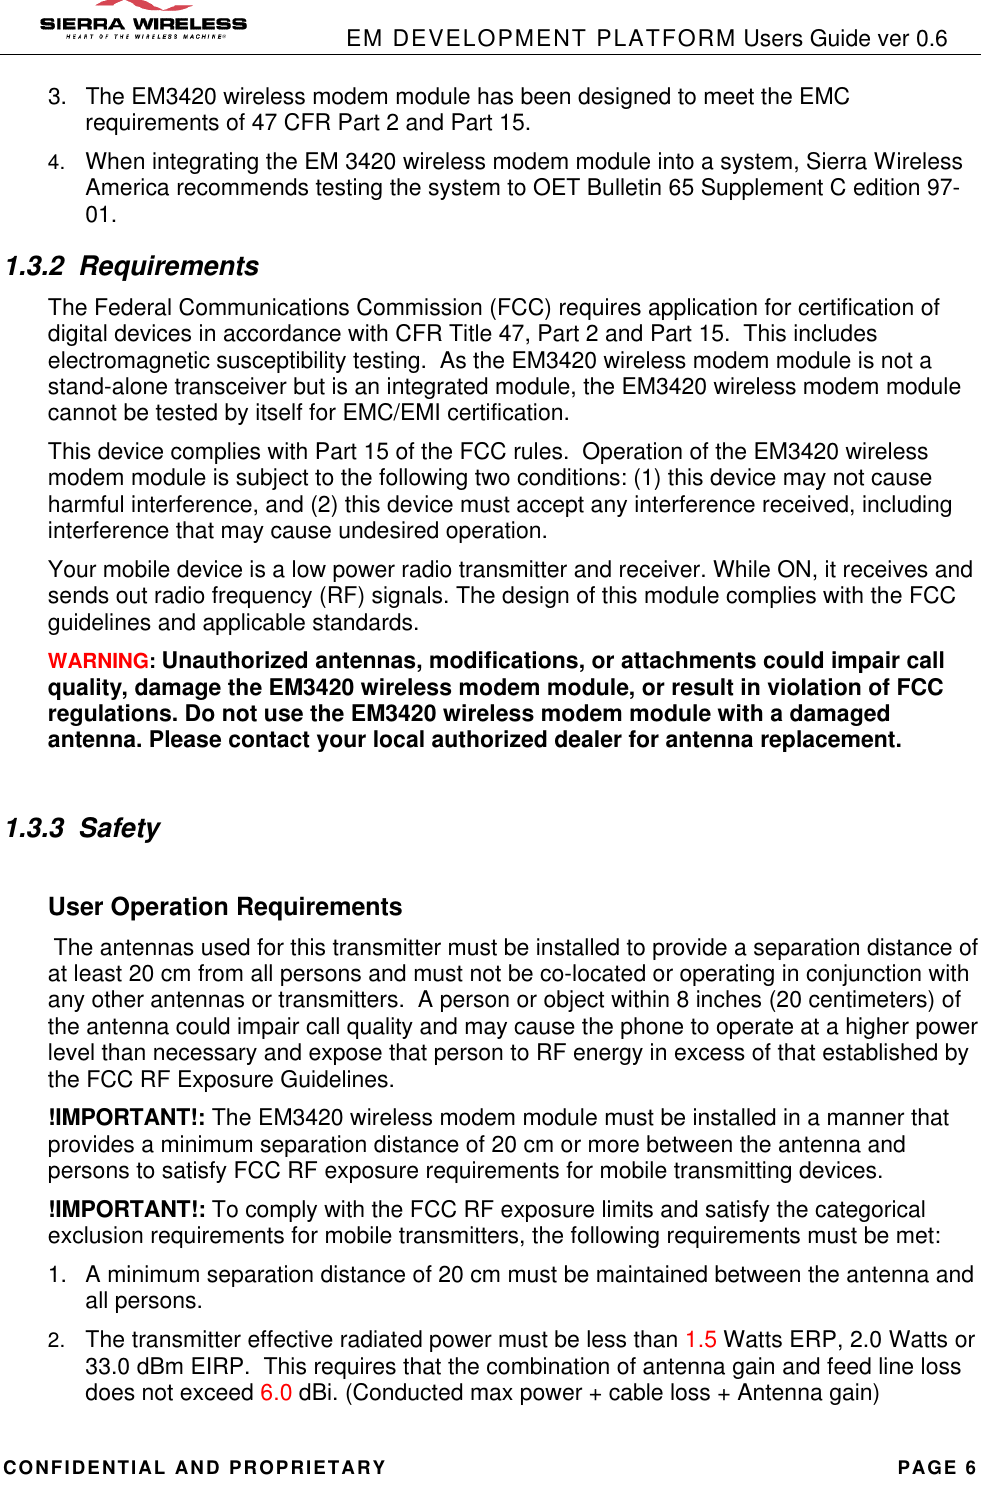            EM DEVELOPMENT PLATFORM Users Guide ver 0.6 CONFIDENTIAL AND PROPRIETARY PAGE 6 3. The EM3420 wireless modem module has been designed to meet the EMC requirements of 47 CFR Part 2 and Part 15. 4. When integrating the EM 3420 wireless modem module into a system, Sierra Wireless America recommends testing the system to OET Bulletin 65 Supplement C edition 97-01. 1.3.2 Requirements The Federal Communications Commission (FCC) requires application for certification of digital devices in accordance with CFR Title 47, Part 2 and Part 15.  This includes electromagnetic susceptibility testing.  As the EM3420 wireless modem module is not a stand-alone transceiver but is an integrated module, the EM3420 wireless modem module cannot be tested by itself for EMC/EMI certification.   This device complies with Part 15 of the FCC rules.  Operation of the EM3420 wireless modem module is subject to the following two conditions: (1) this device may not cause harmful interference, and (2) this device must accept any interference received, including interference that may cause undesired operation. Your mobile device is a low power radio transmitter and receiver. While ON, it receives and sends out radio frequency (RF) signals. The design of this module complies with the FCC guidelines and applicable standards. WARNING: Unauthorized antennas, modifications, or attachments could impair call quality, damage the EM3420 wireless modem module, or result in violation of FCC regulations. Do not use the EM3420 wireless modem module with a damaged antenna. Please contact your local authorized dealer for antenna replacement.  1.3.3 Safety  User Operation Requirements  The antennas used for this transmitter must be installed to provide a separation distance of at least 20 cm from all persons and must not be co-located or operating in conjunction with any other antennas or transmitters.  A person or object within 8 inches (20 centimeters) of the antenna could impair call quality and may cause the phone to operate at a higher power level than necessary and expose that person to RF energy in excess of that established by the FCC RF Exposure Guidelines. !IMPORTANT!: The EM3420 wireless modem module must be installed in a manner that provides a minimum separation distance of 20 cm or more between the antenna and persons to satisfy FCC RF exposure requirements for mobile transmitting devices. !IMPORTANT!: To comply with the FCC RF exposure limits and satisfy the categorical exclusion requirements for mobile transmitters, the following requirements must be met: 1. A minimum separation distance of 20 cm must be maintained between the antenna and all persons. 2. The transmitter effective radiated power must be less than 1.5 Watts ERP, 2.0 Watts or 33.0 dBm EIRP.  This requires that the combination of antenna gain and feed line loss does not exceed 6.0 dBi. (Conducted max power + cable loss + Antenna gain) 